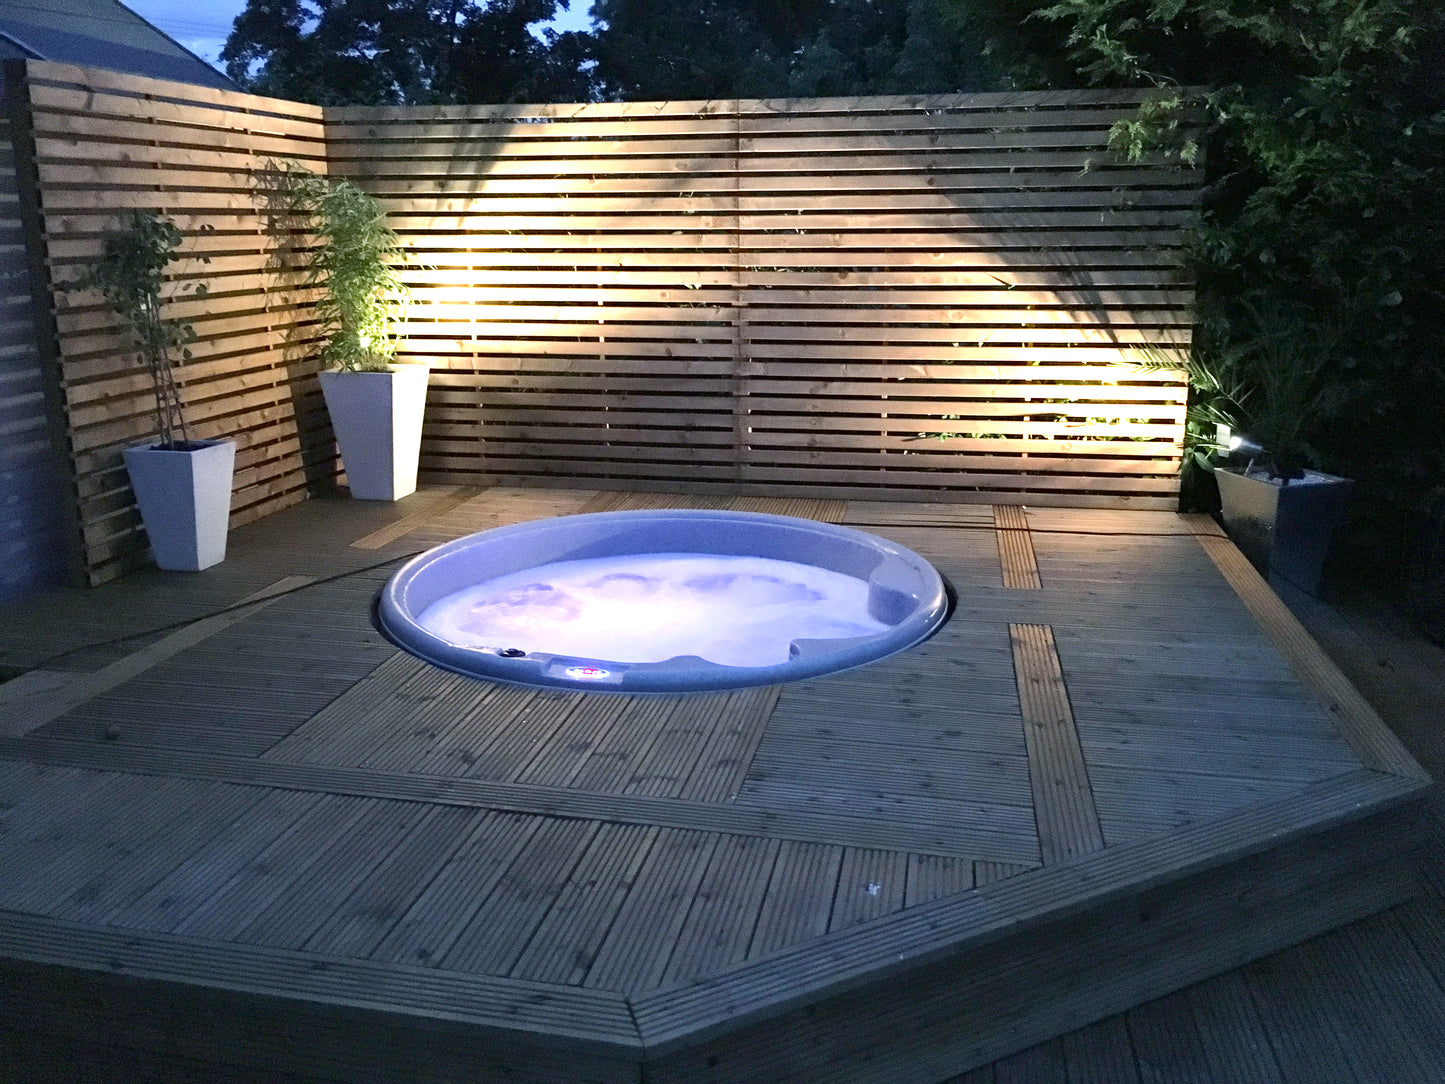 RotoSpa - Orbis - 5 Person spa - Beyond outdoor living